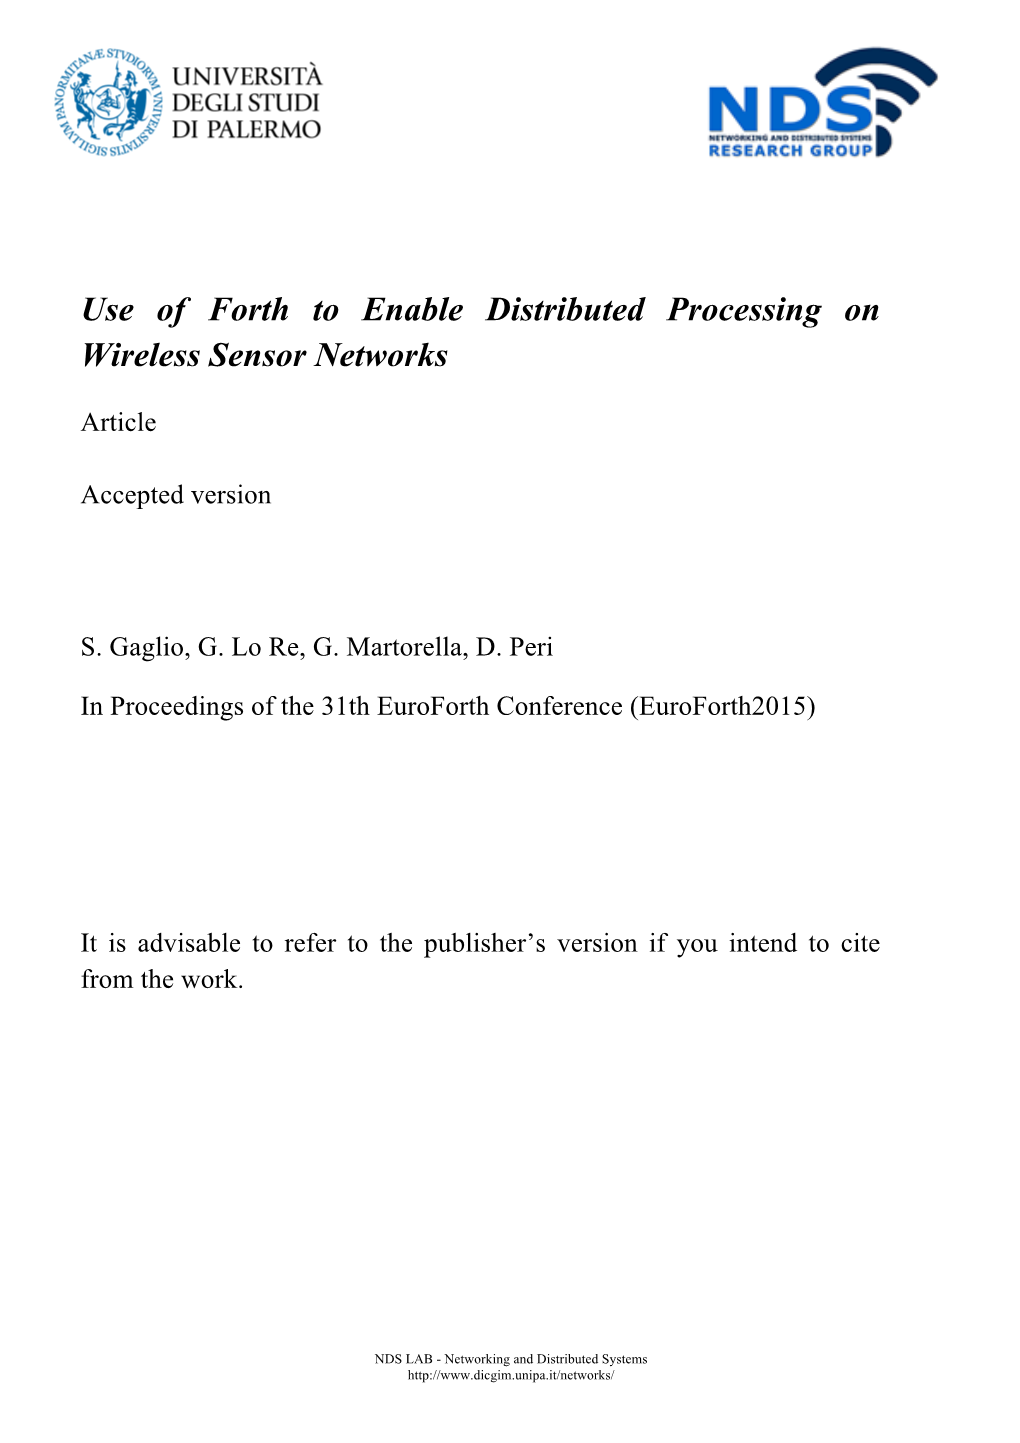 Use of Forth to Enable Distributed Processing on Wireless Sensor Networks